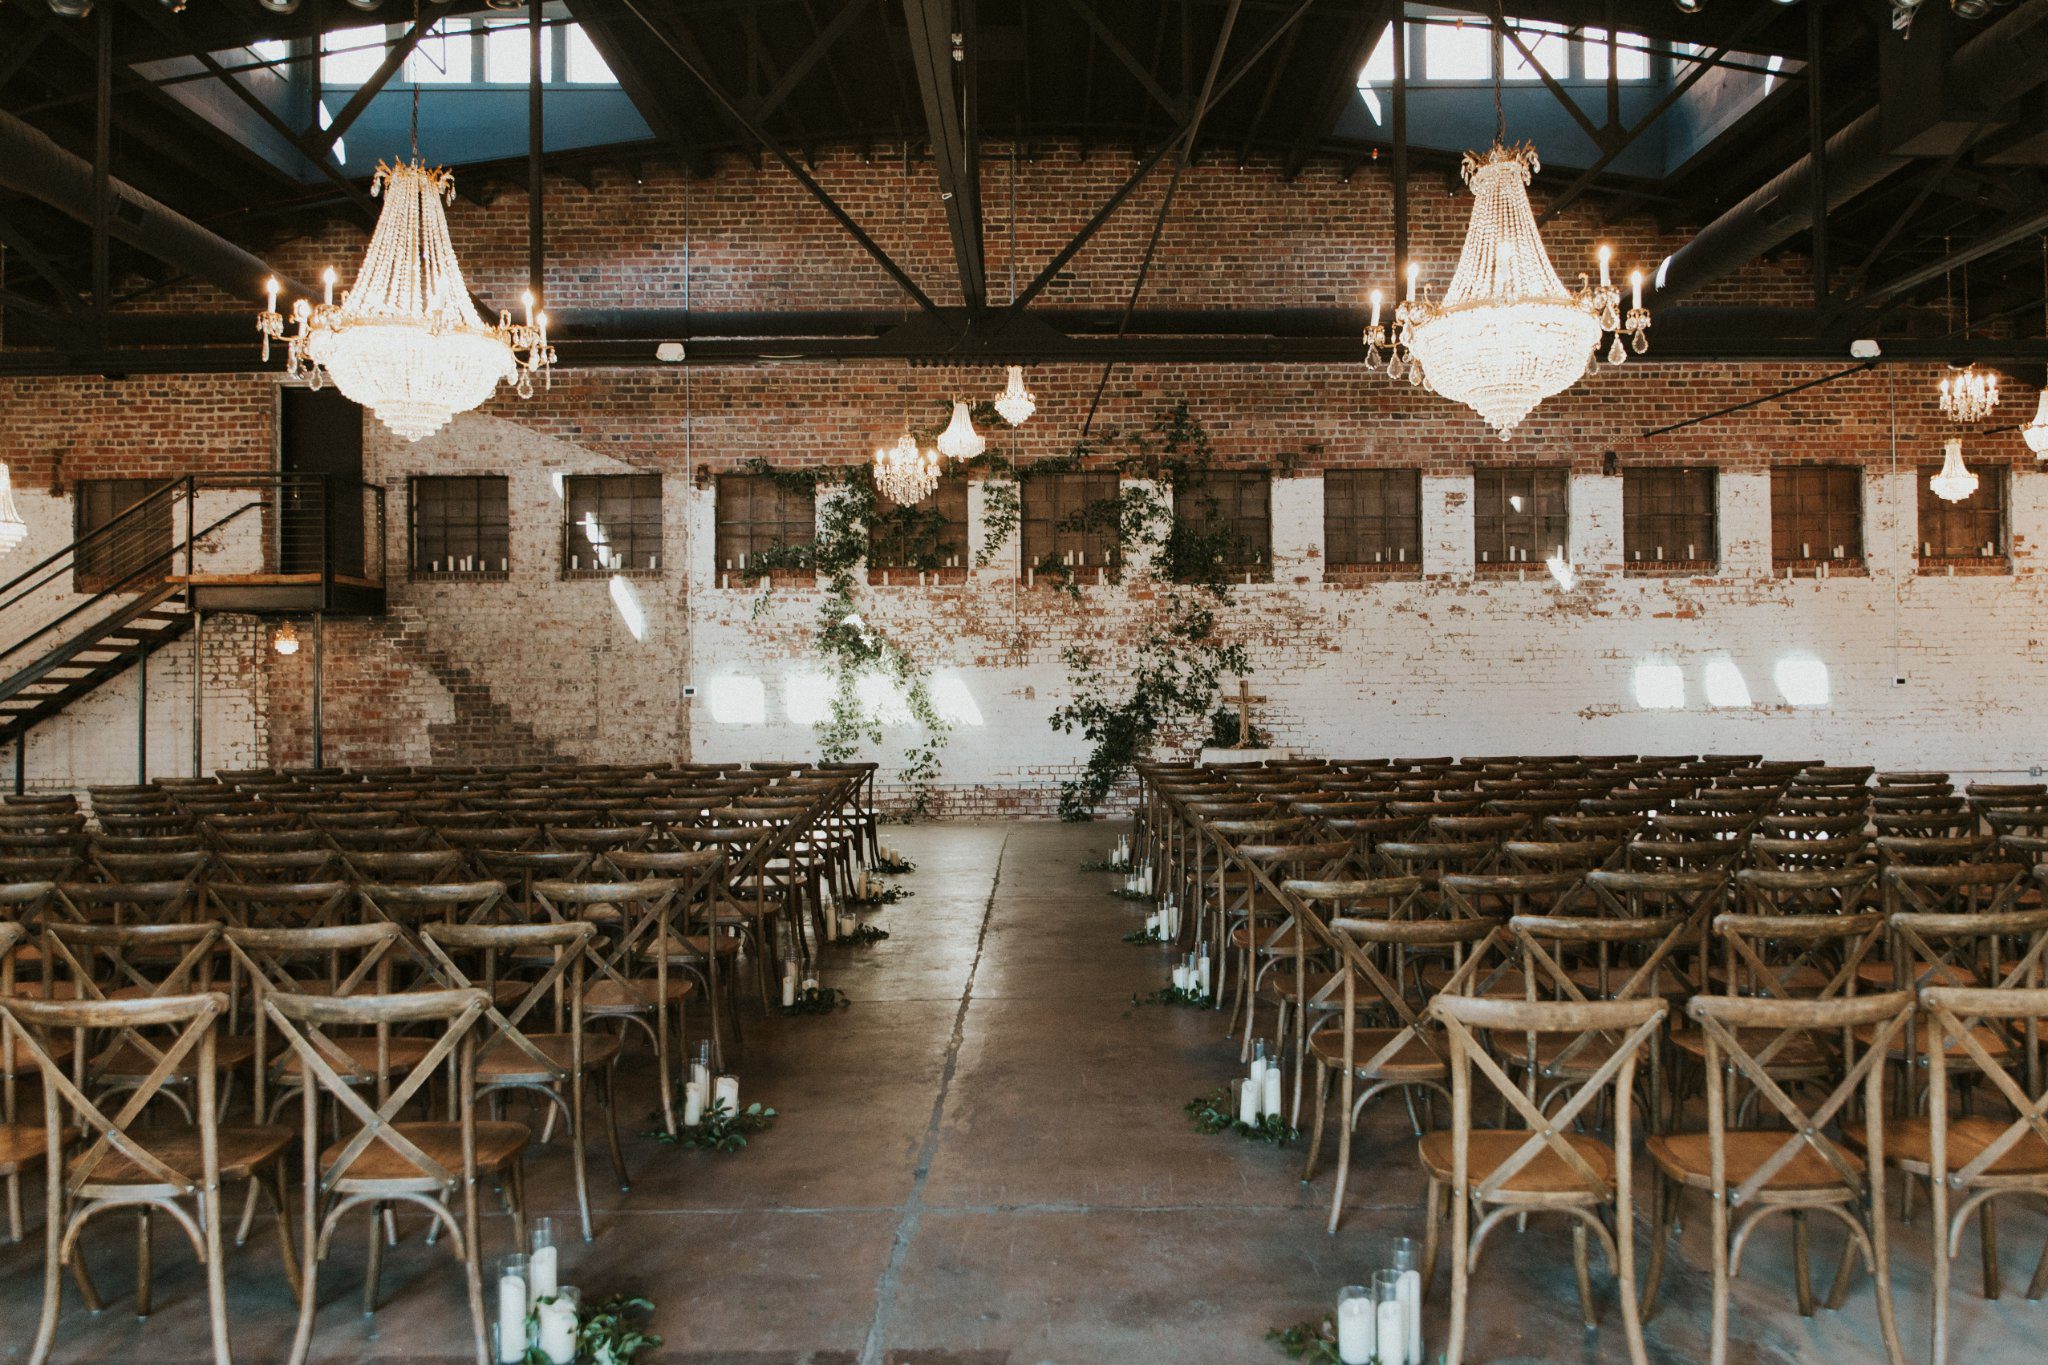 Chairs set up aside the main aisle